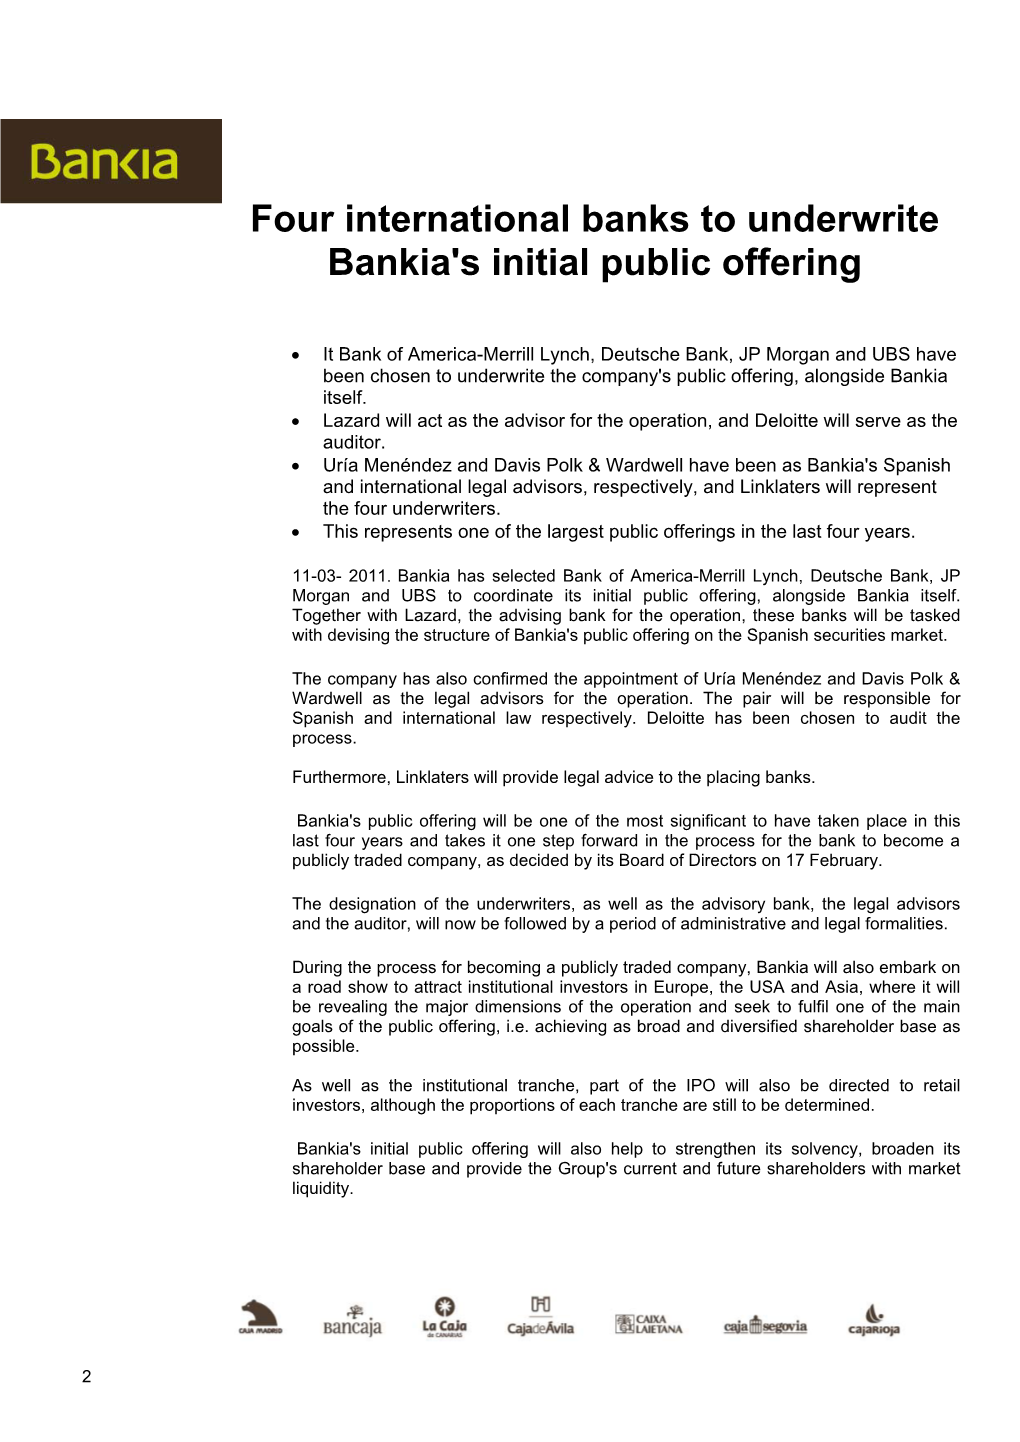 Four International Banks to Underwrite Bankia's Initial Public Offering